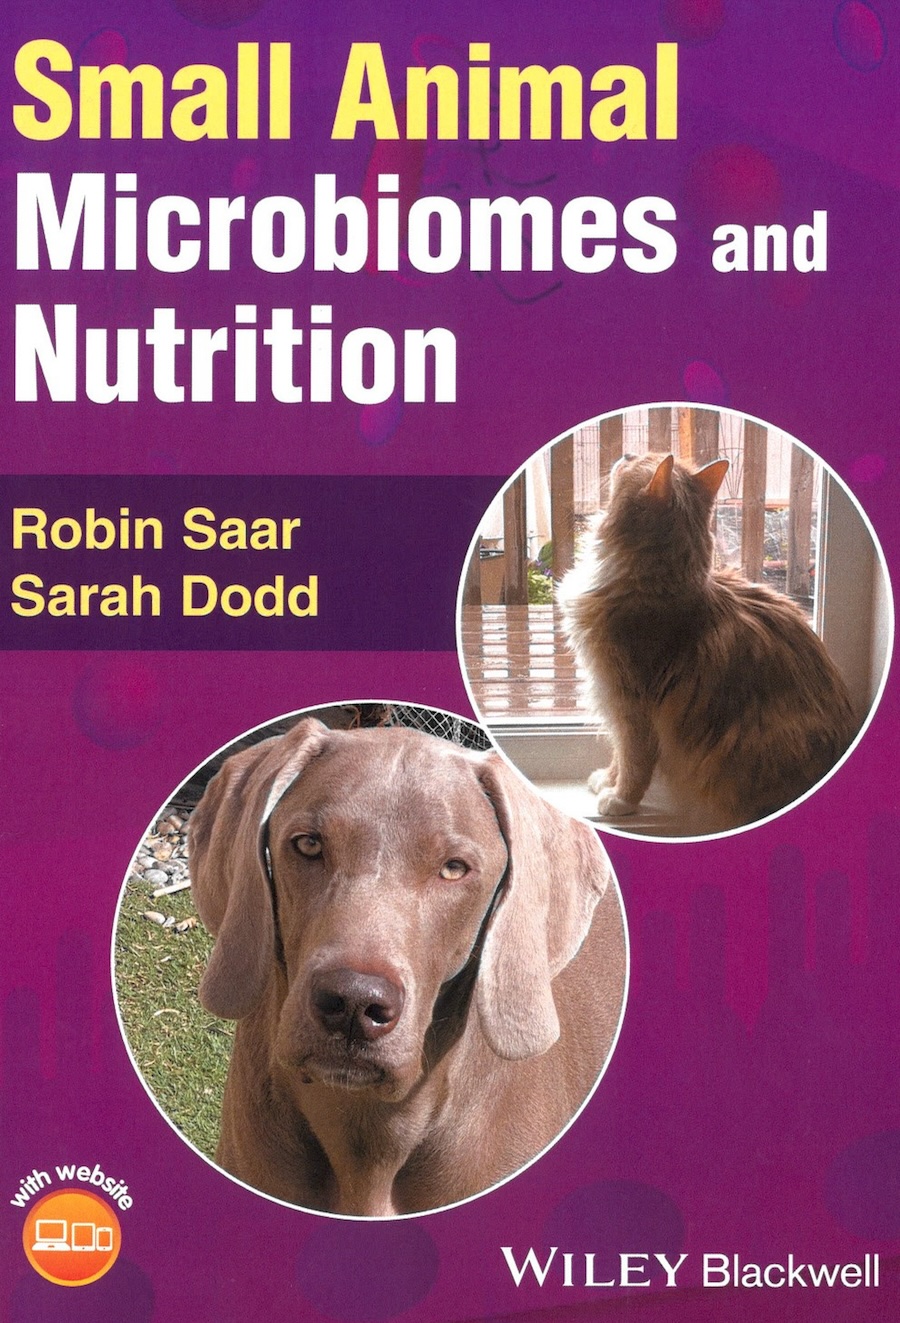 Small animal microbiomes and nutrition